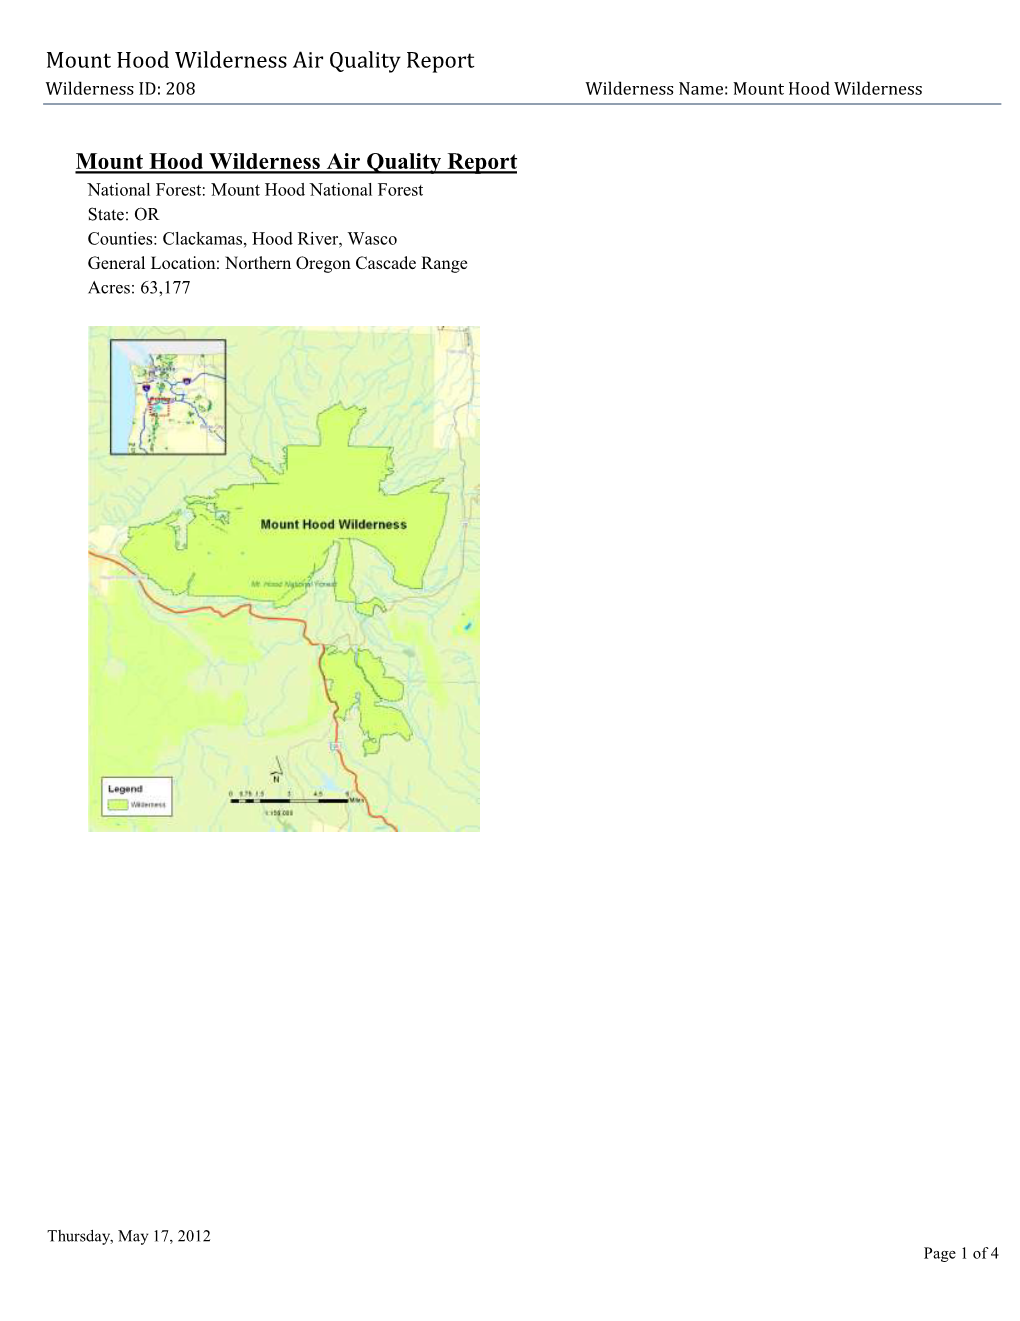 Mount Hood Wilderness Air Quality Report, 2012